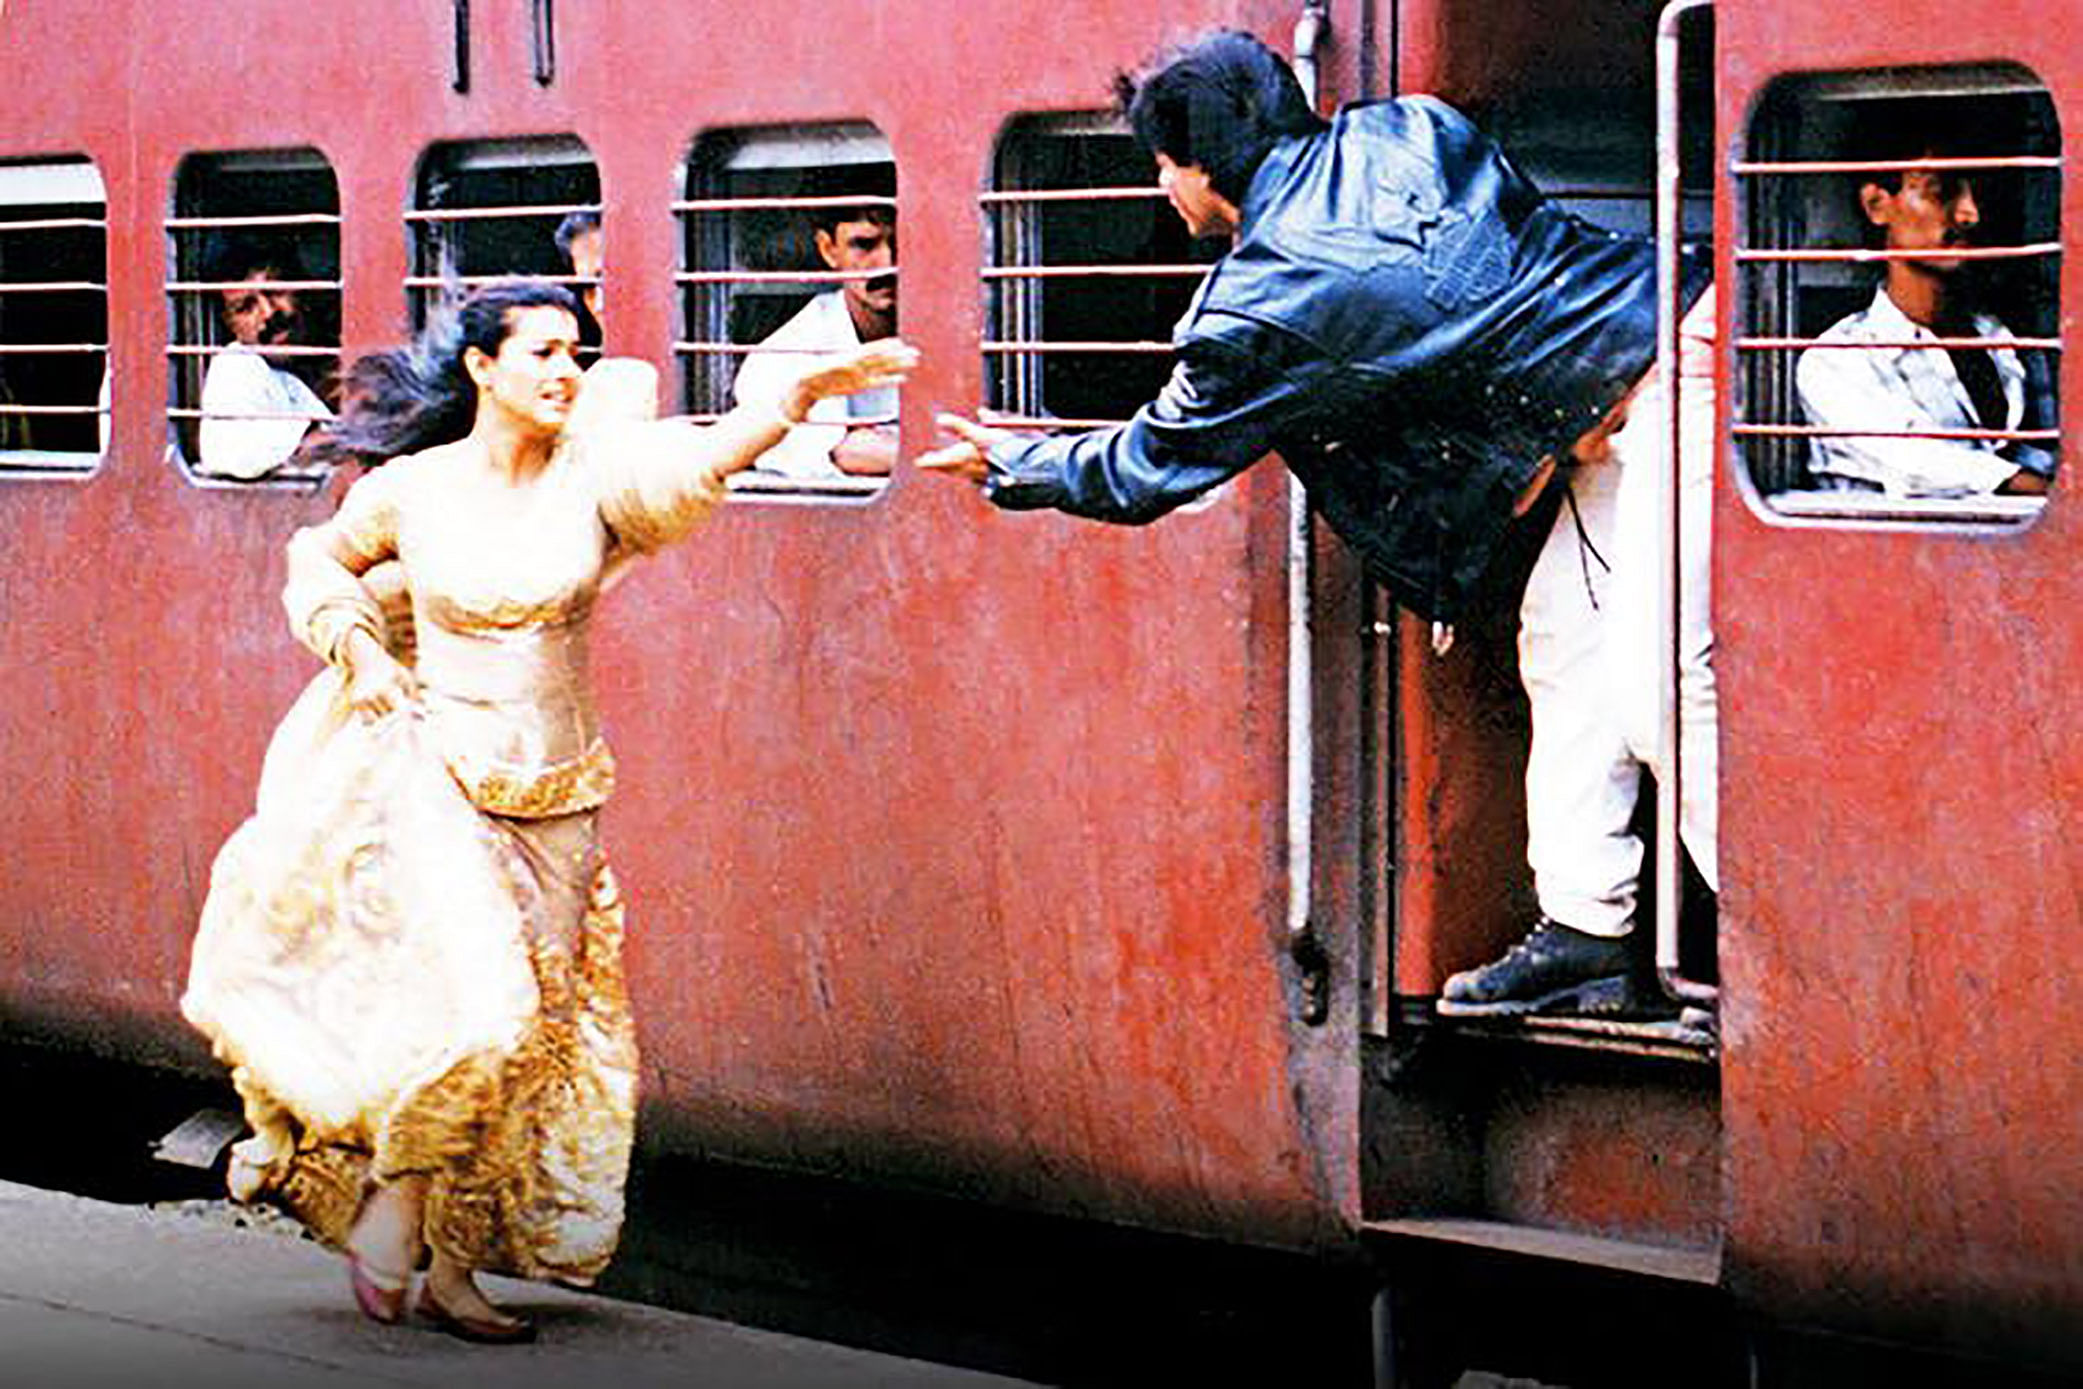 With Shah Rukh Khan and Kajol in the lead, ‘Dilwale Dulhaniya Le Jayenge’ was released in 1995. It is the longest-running Bollywood film.